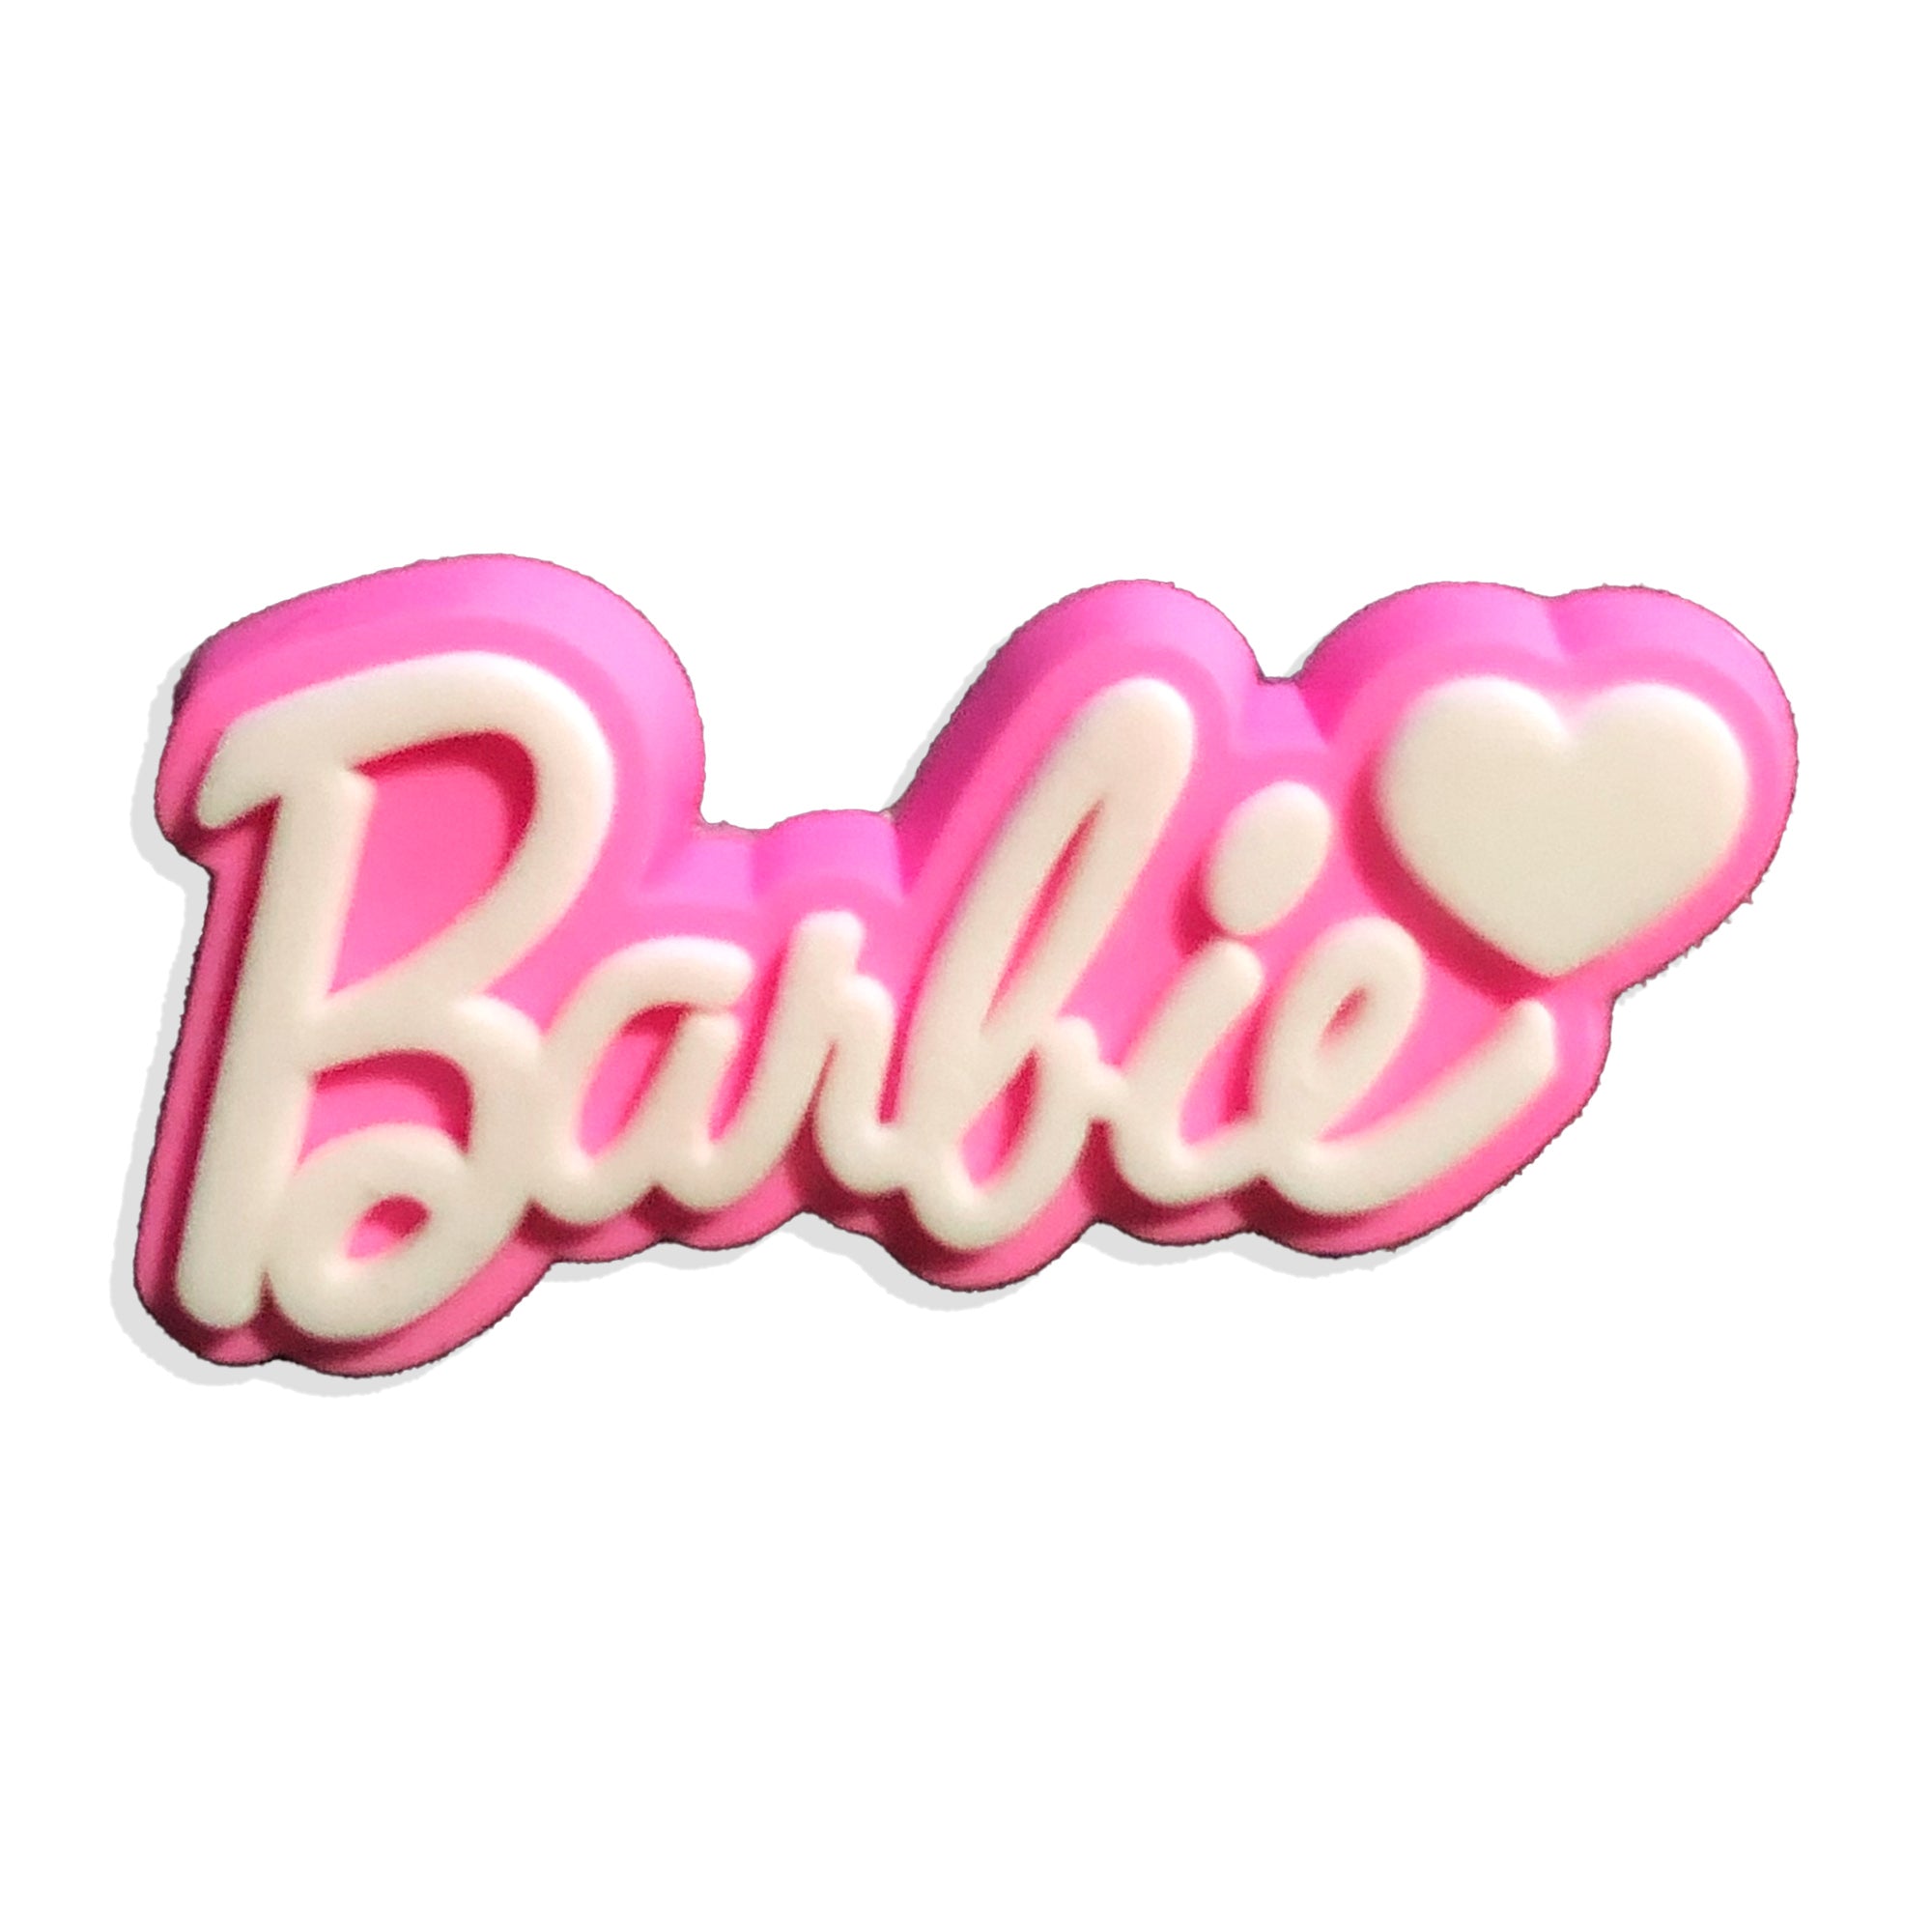 Barbie Enchantment: Discovering the Charms of a Fashion Icon - Questsole